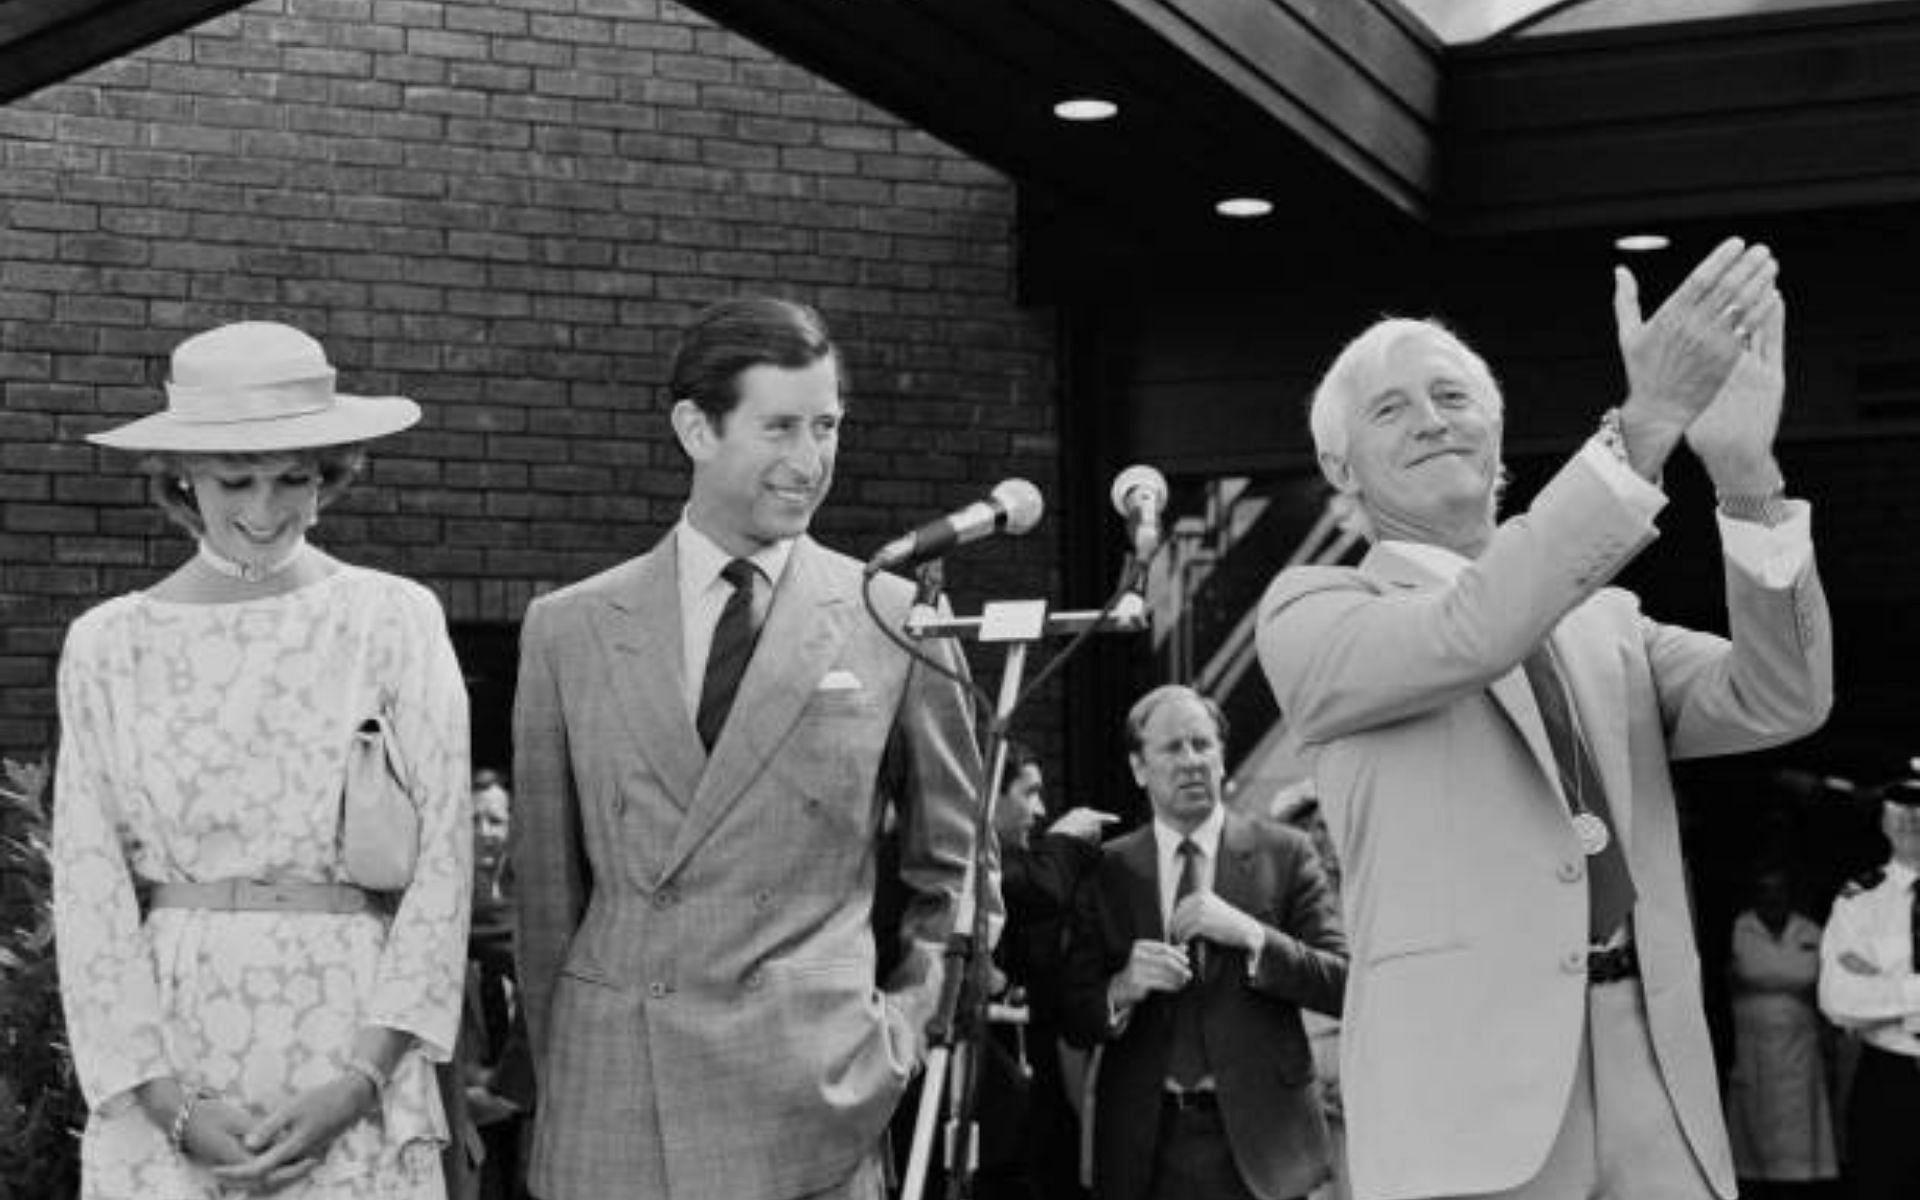 Jimmy Savile with Princess Diana and Prince Charles in 1983 (Image via Hilaria McCarthy/Getty Images)